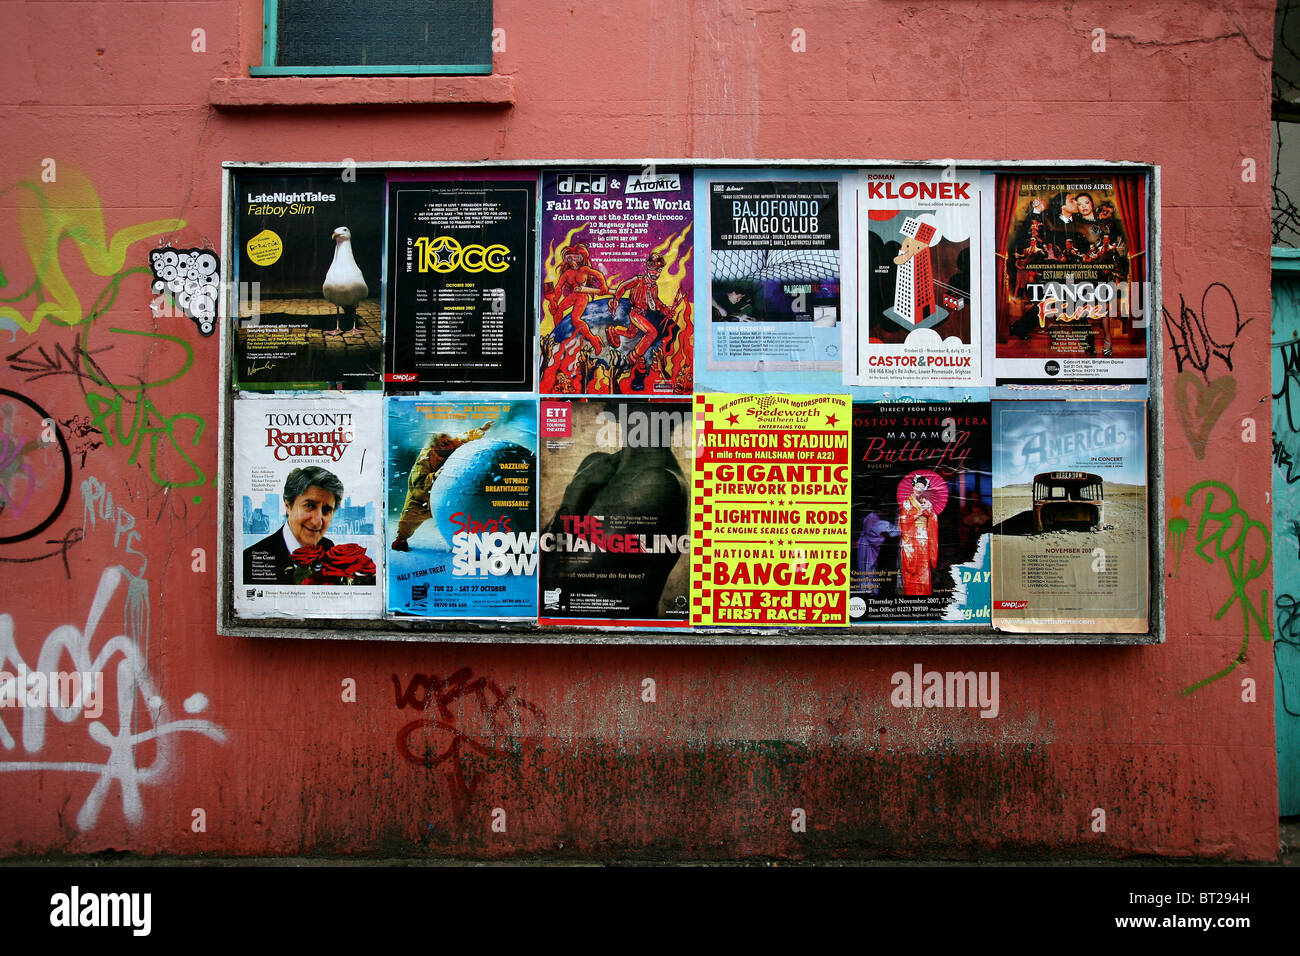 Wall with posters hi-res stock - photography Alamy images and